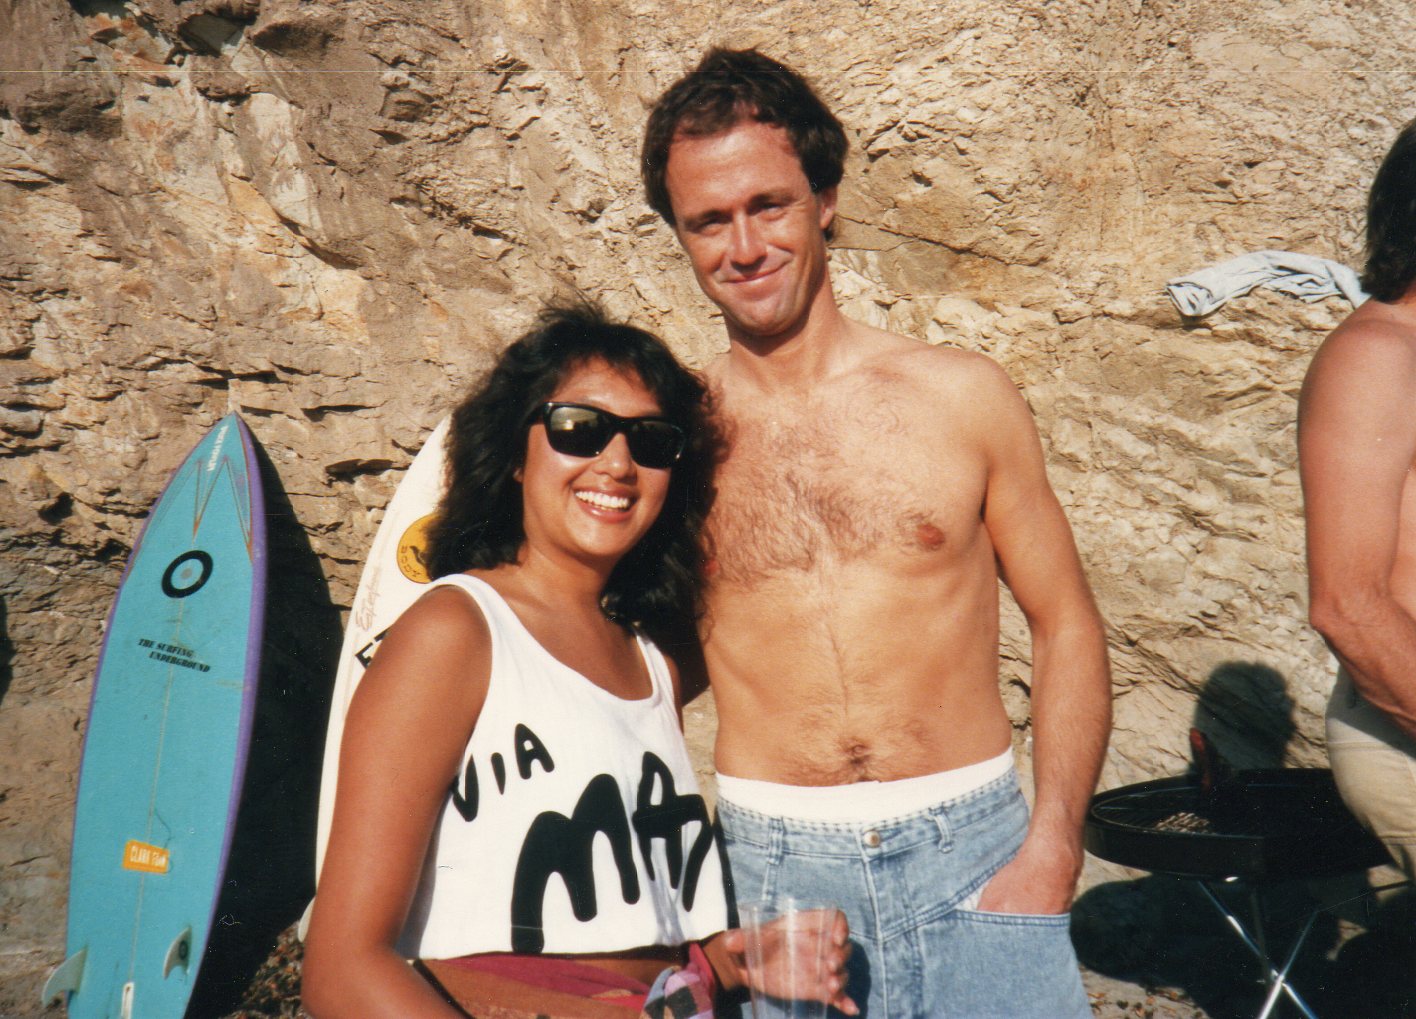 Party at Shell Beach
~1988 Joanna Thater and Kevin Houlihan
